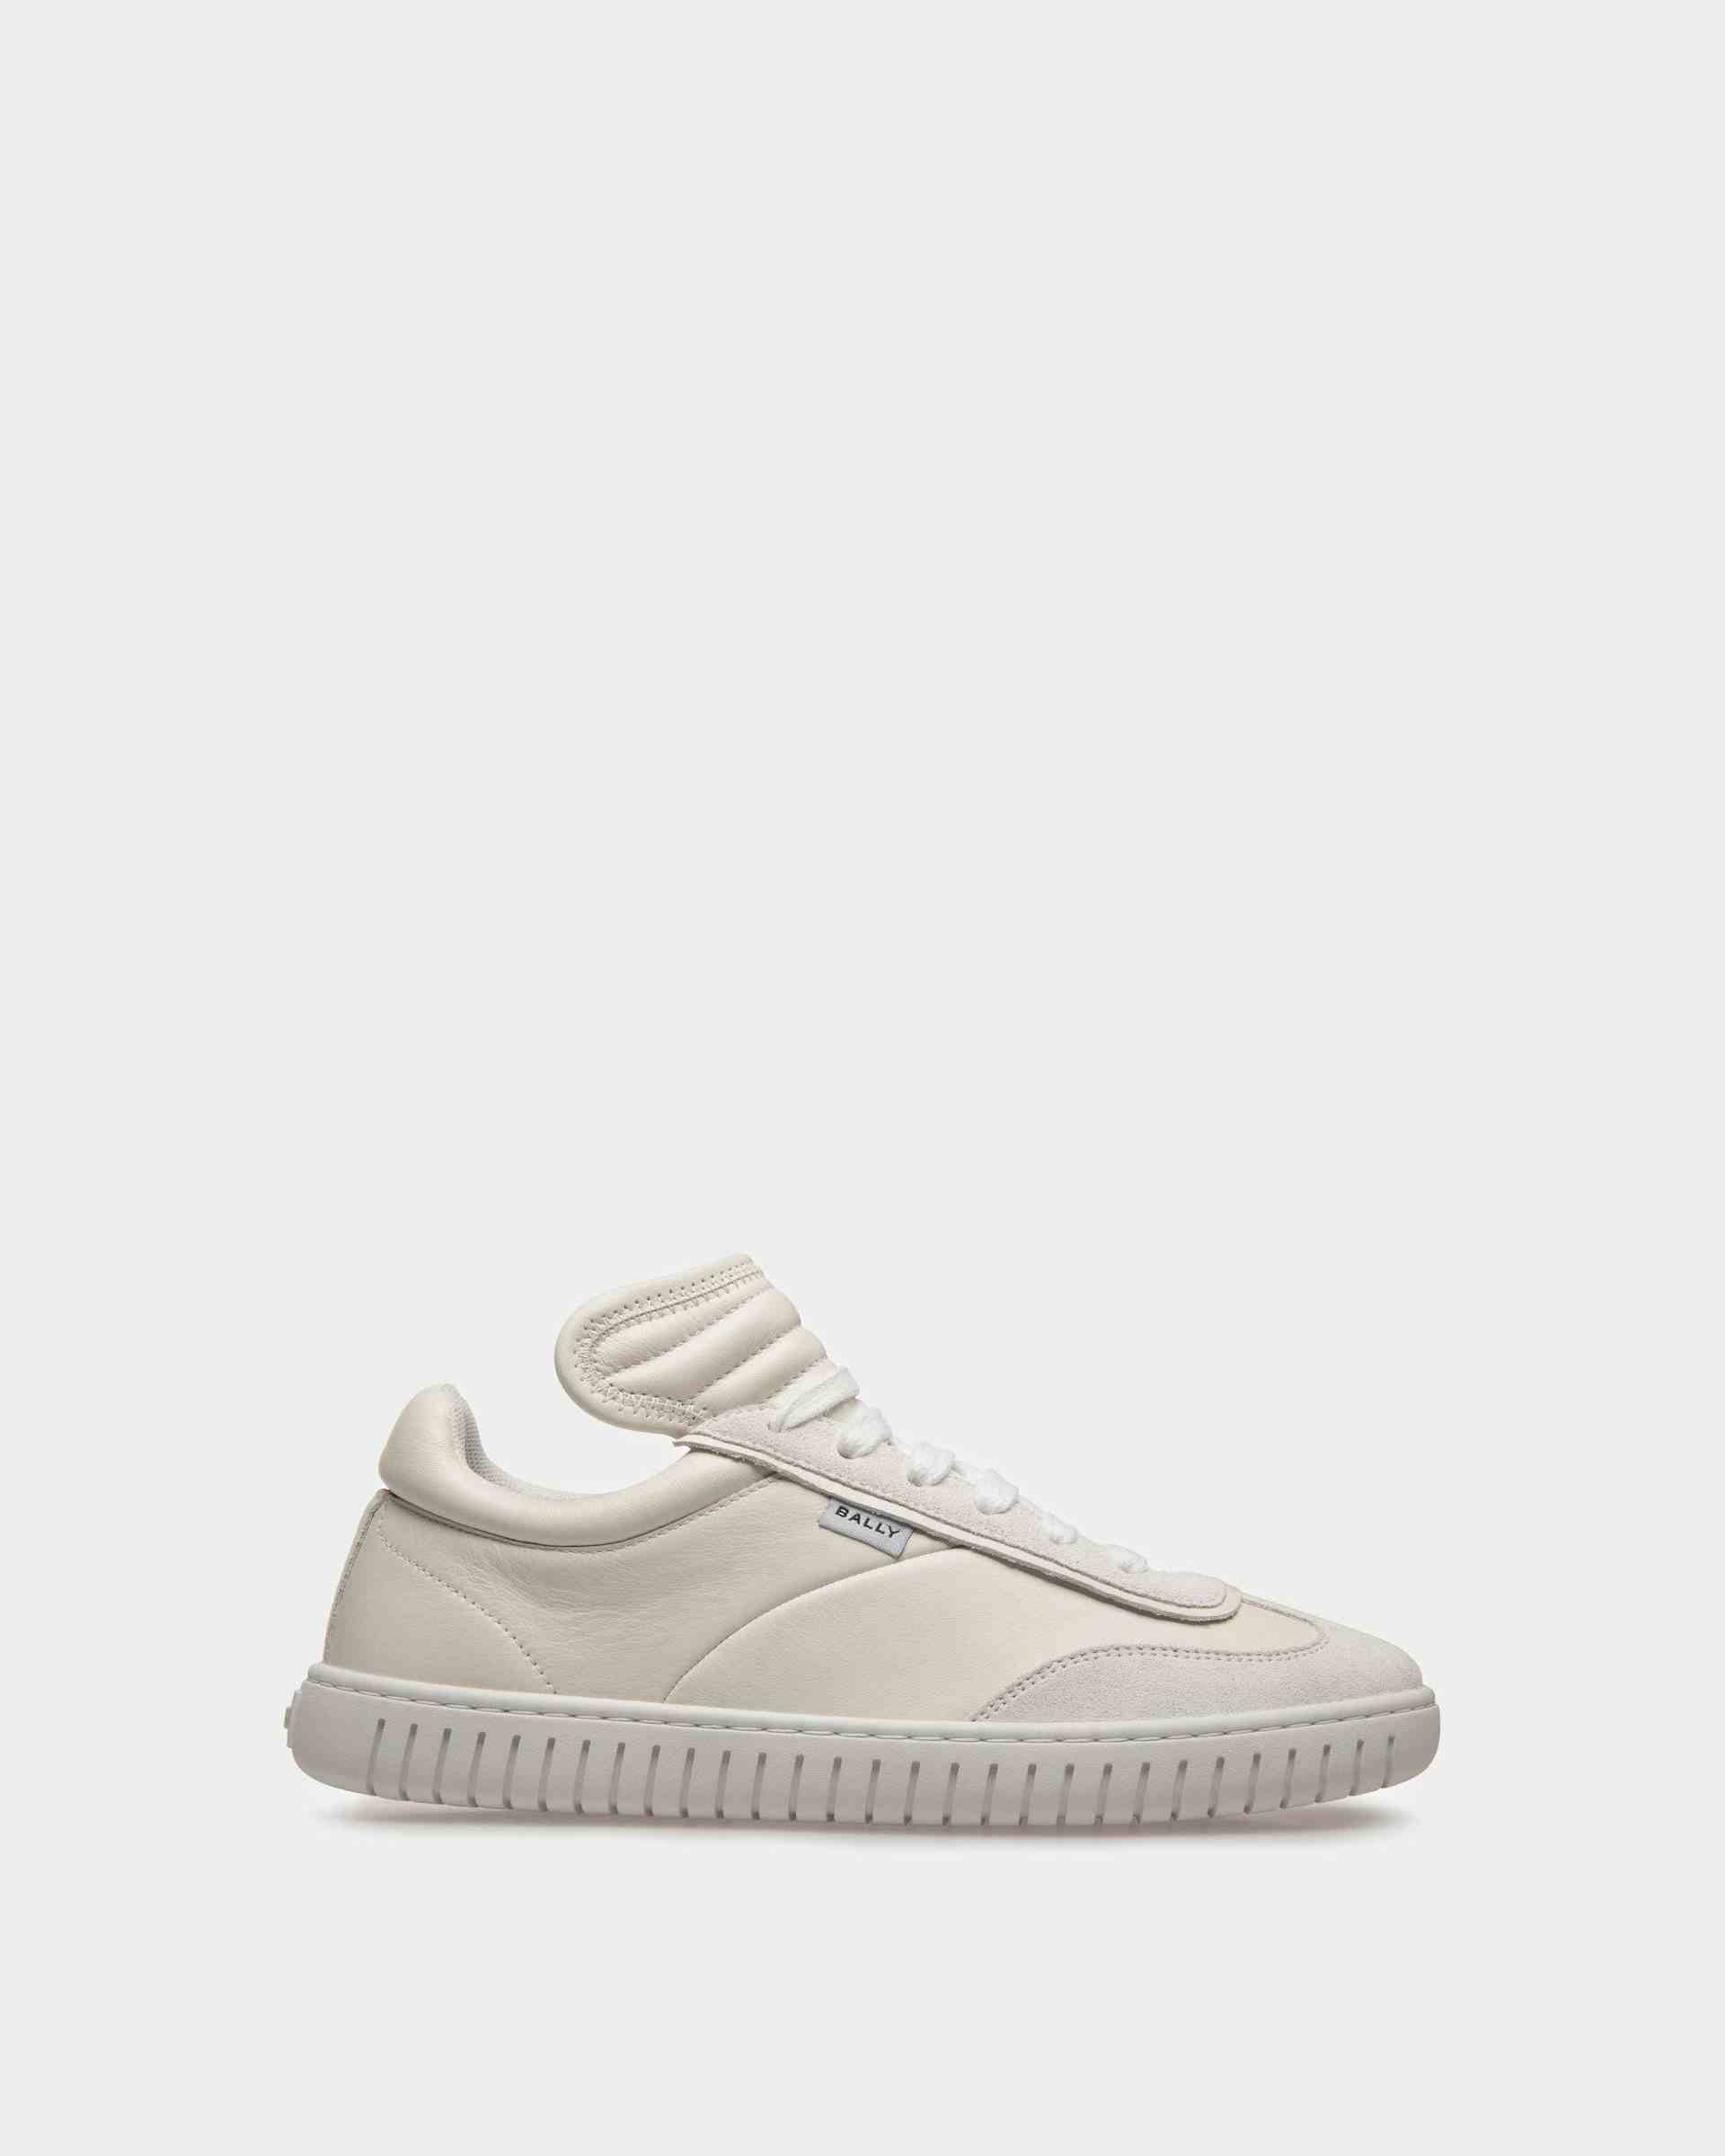 Player Sneakers In White Leather - Women's - Bally